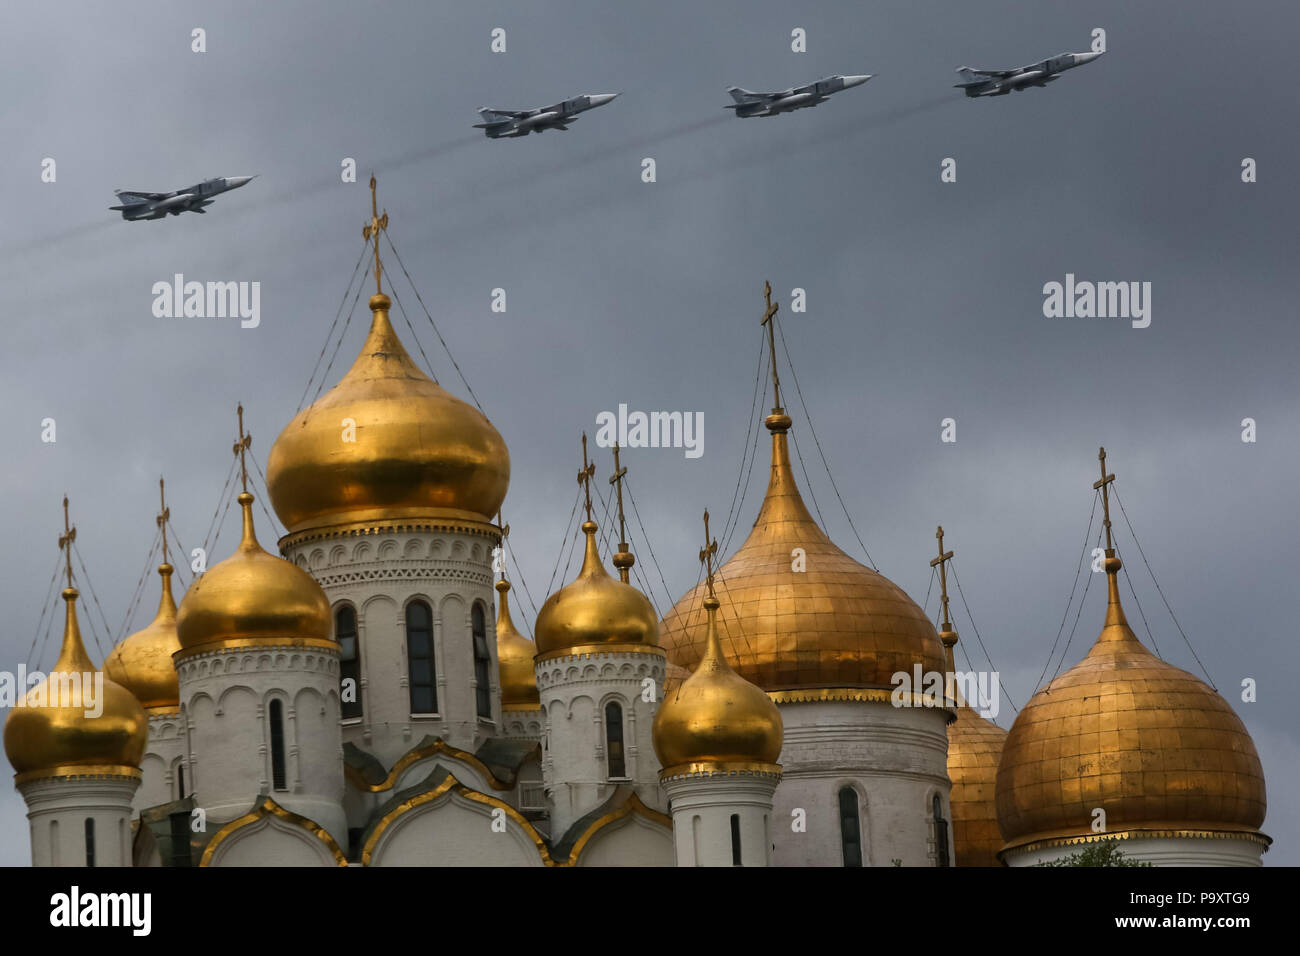 Four Sukhoi Su-24M  jets of Russian Air Force fly in formation over the Kremlin of Moscow during a rehearsal for the Victory Day military parade to ce Stock Photo